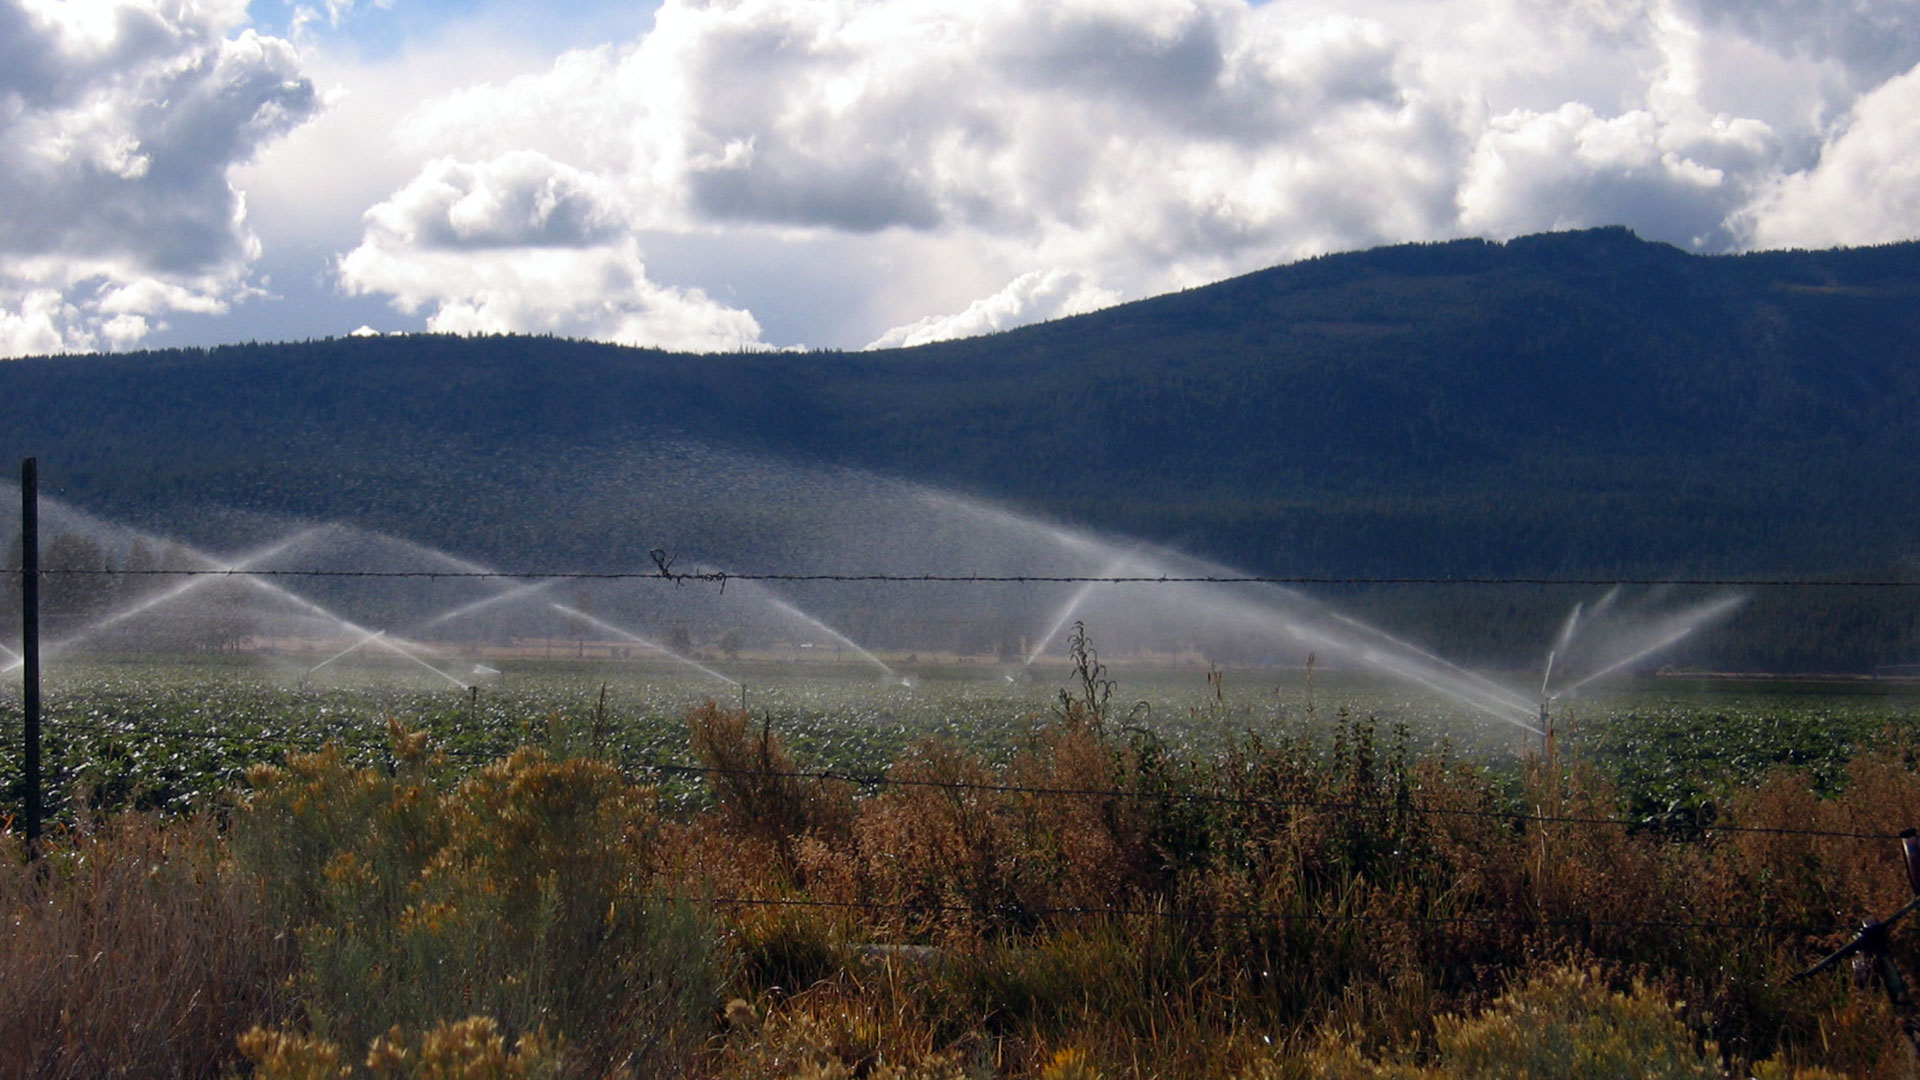 Water sprays across a field with blue mountains looming behind and puffy clouds overhead.